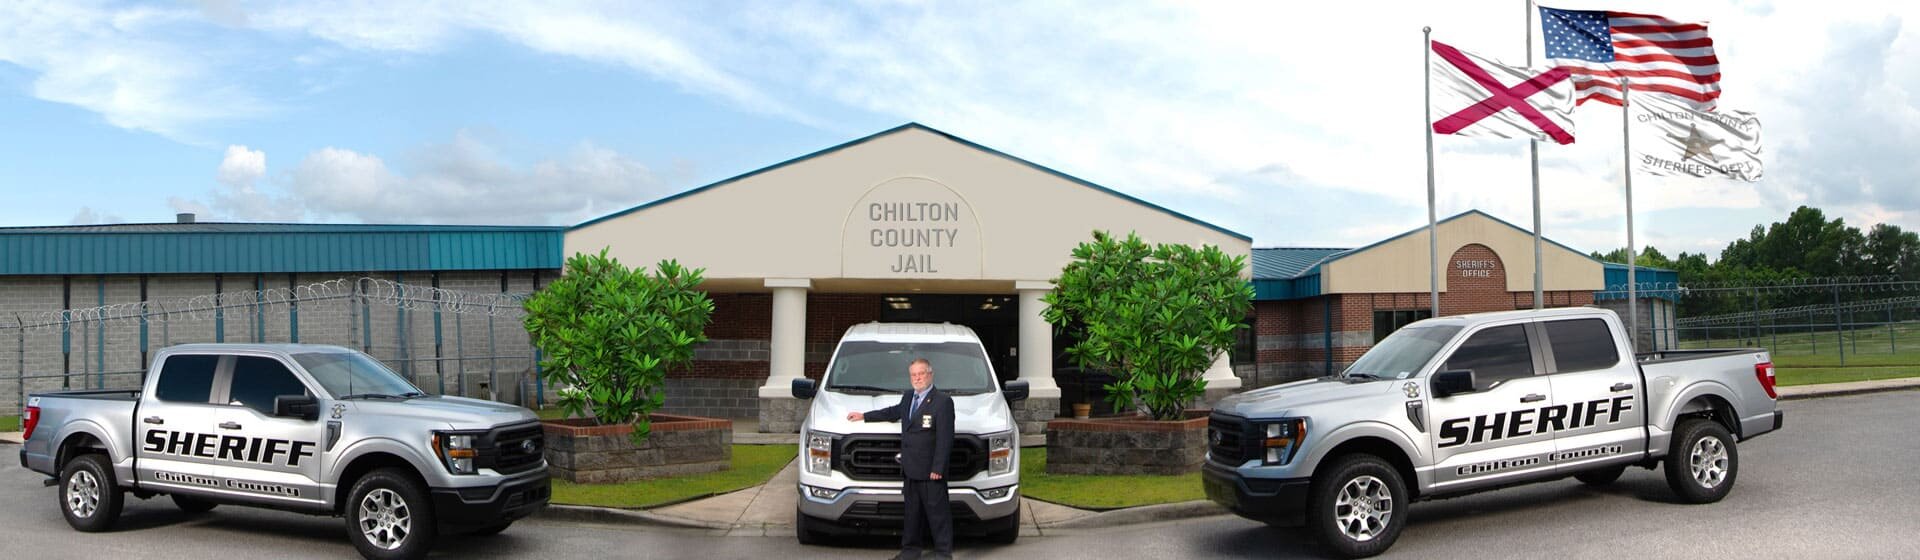 Chilton County Jail with Sheriff John Shearon and multiple patrol vehicles.